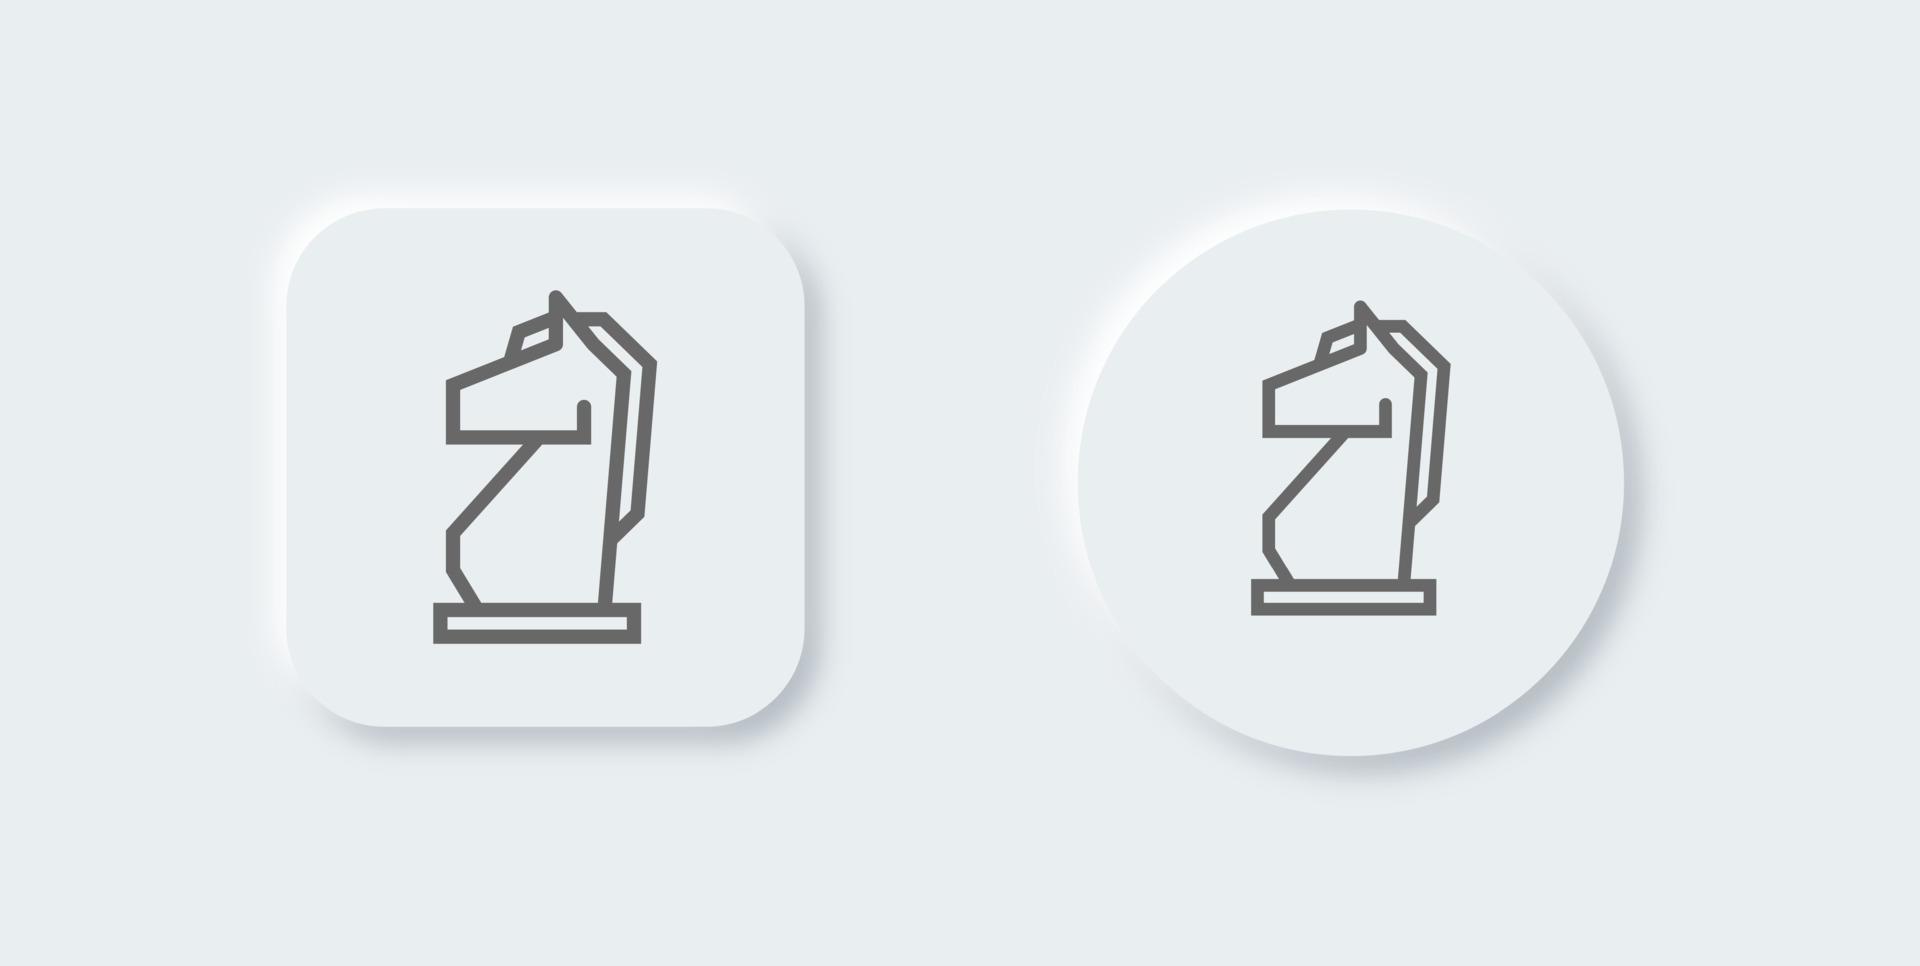 Chess line icon in neomorphic design style. Horse signs vector illustration.